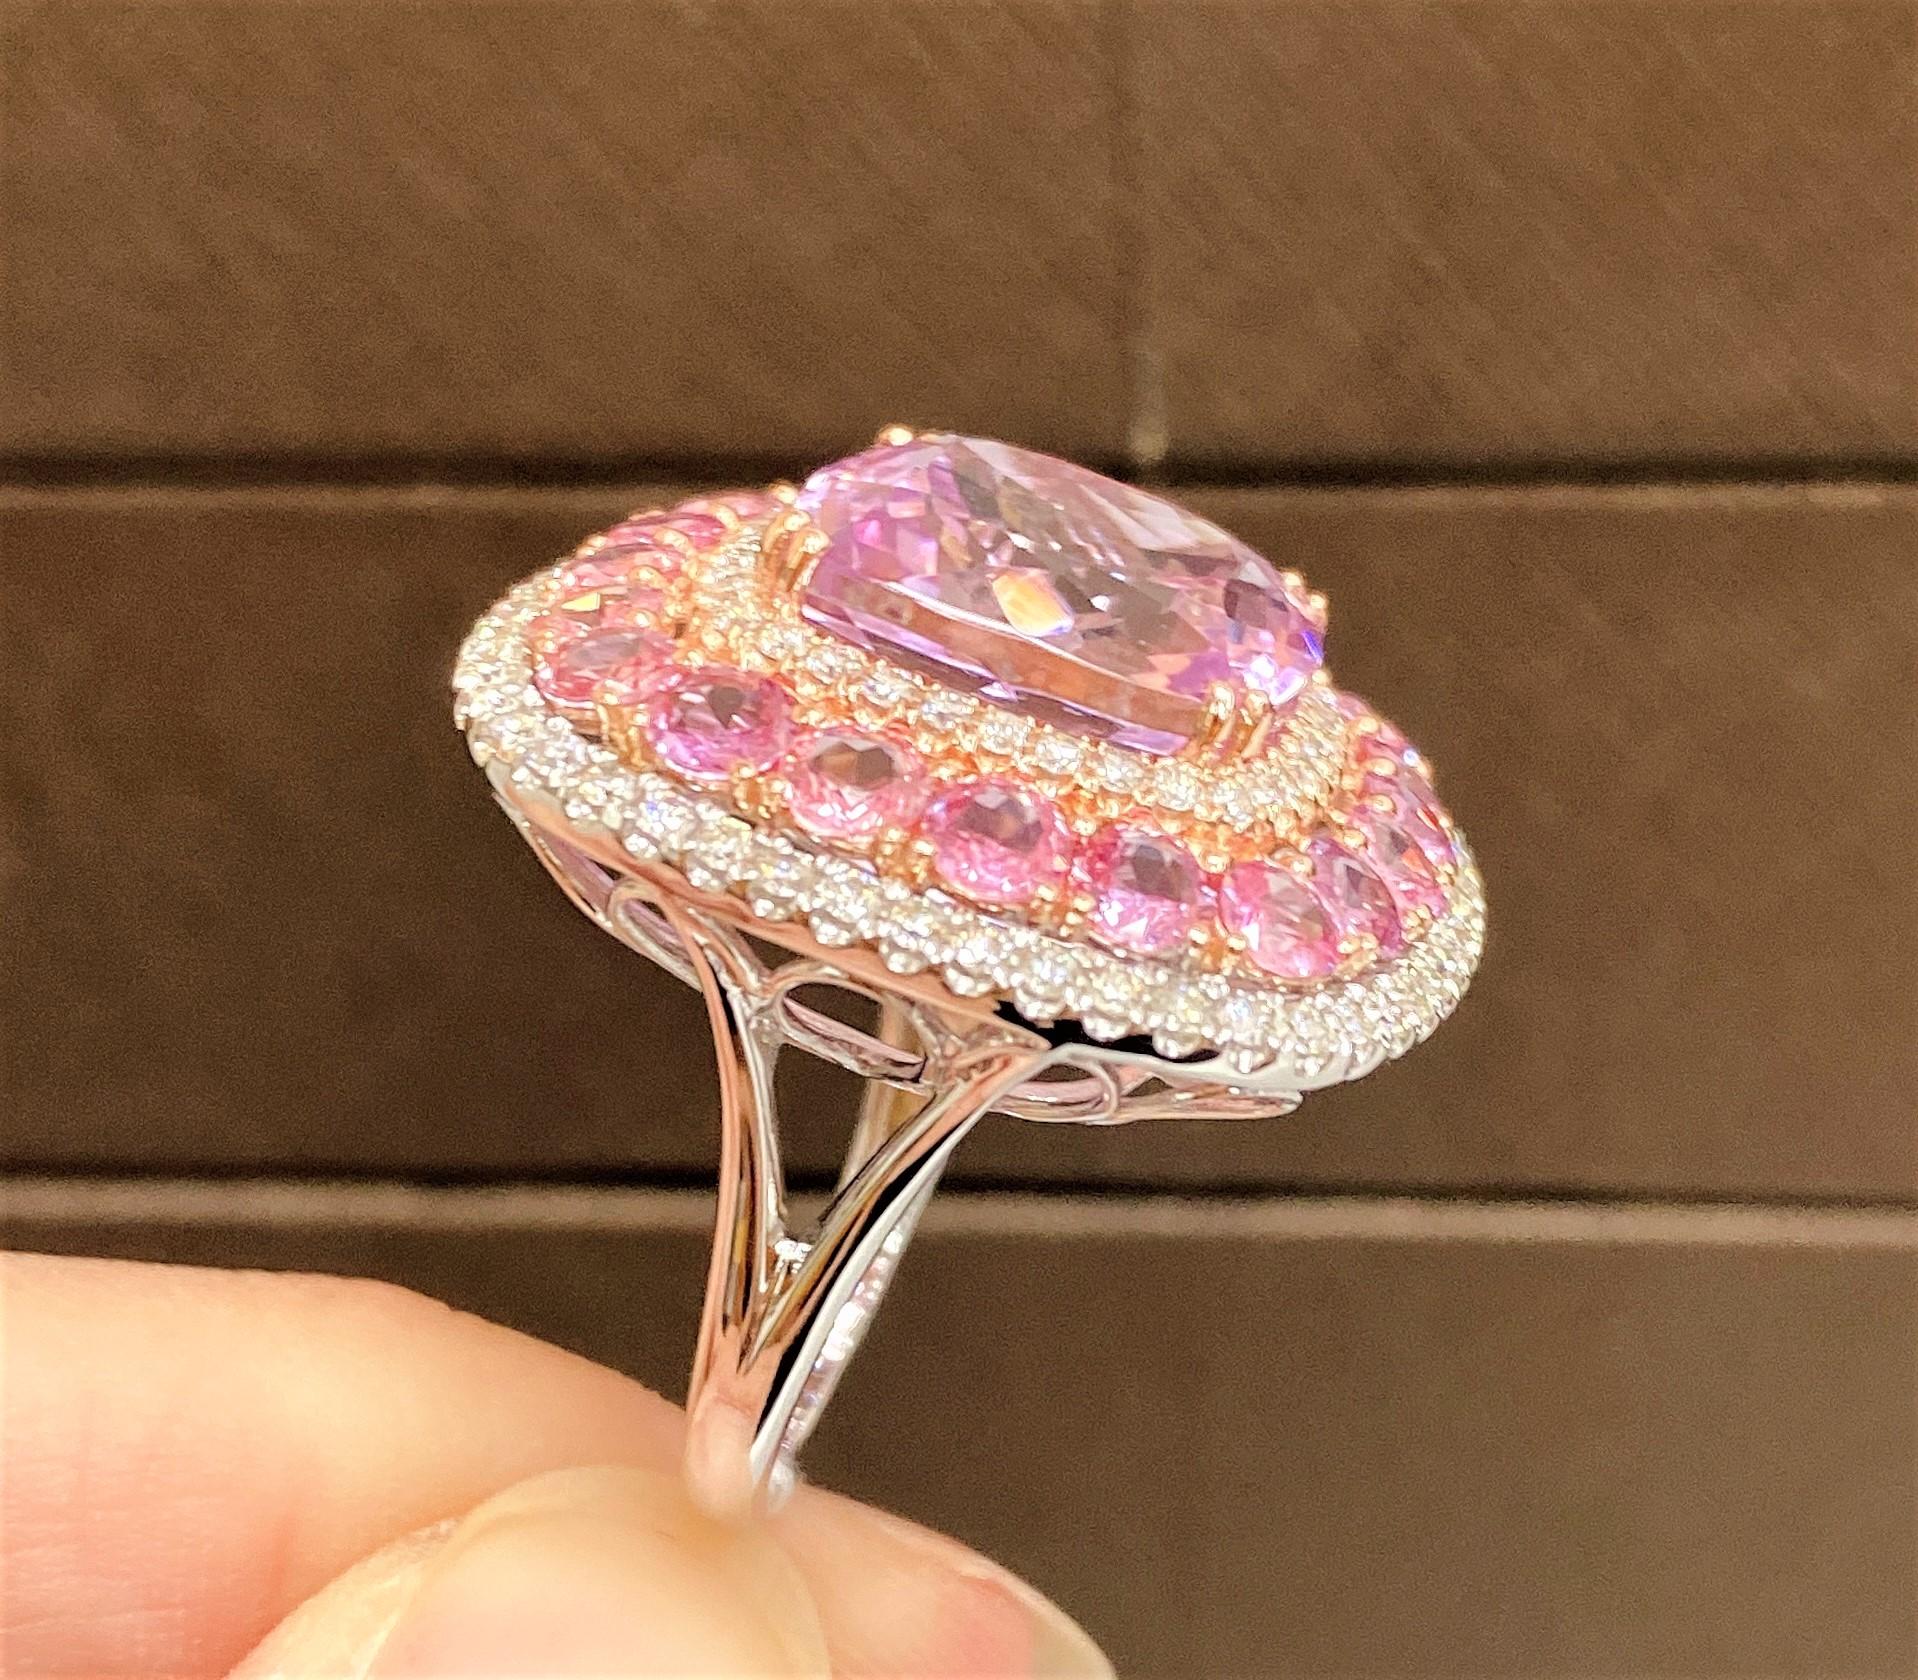 The Following Item we are offering is this Rare Important Radiant 18KT Gold Winston Style LARGE Glittering and Sparkling Magnificent Fancy Kunzite and Fancy Pink Sapphire White Diamond Ring. Ring Contains a Beautiful Fancy Square Shaped Pink Kunzite